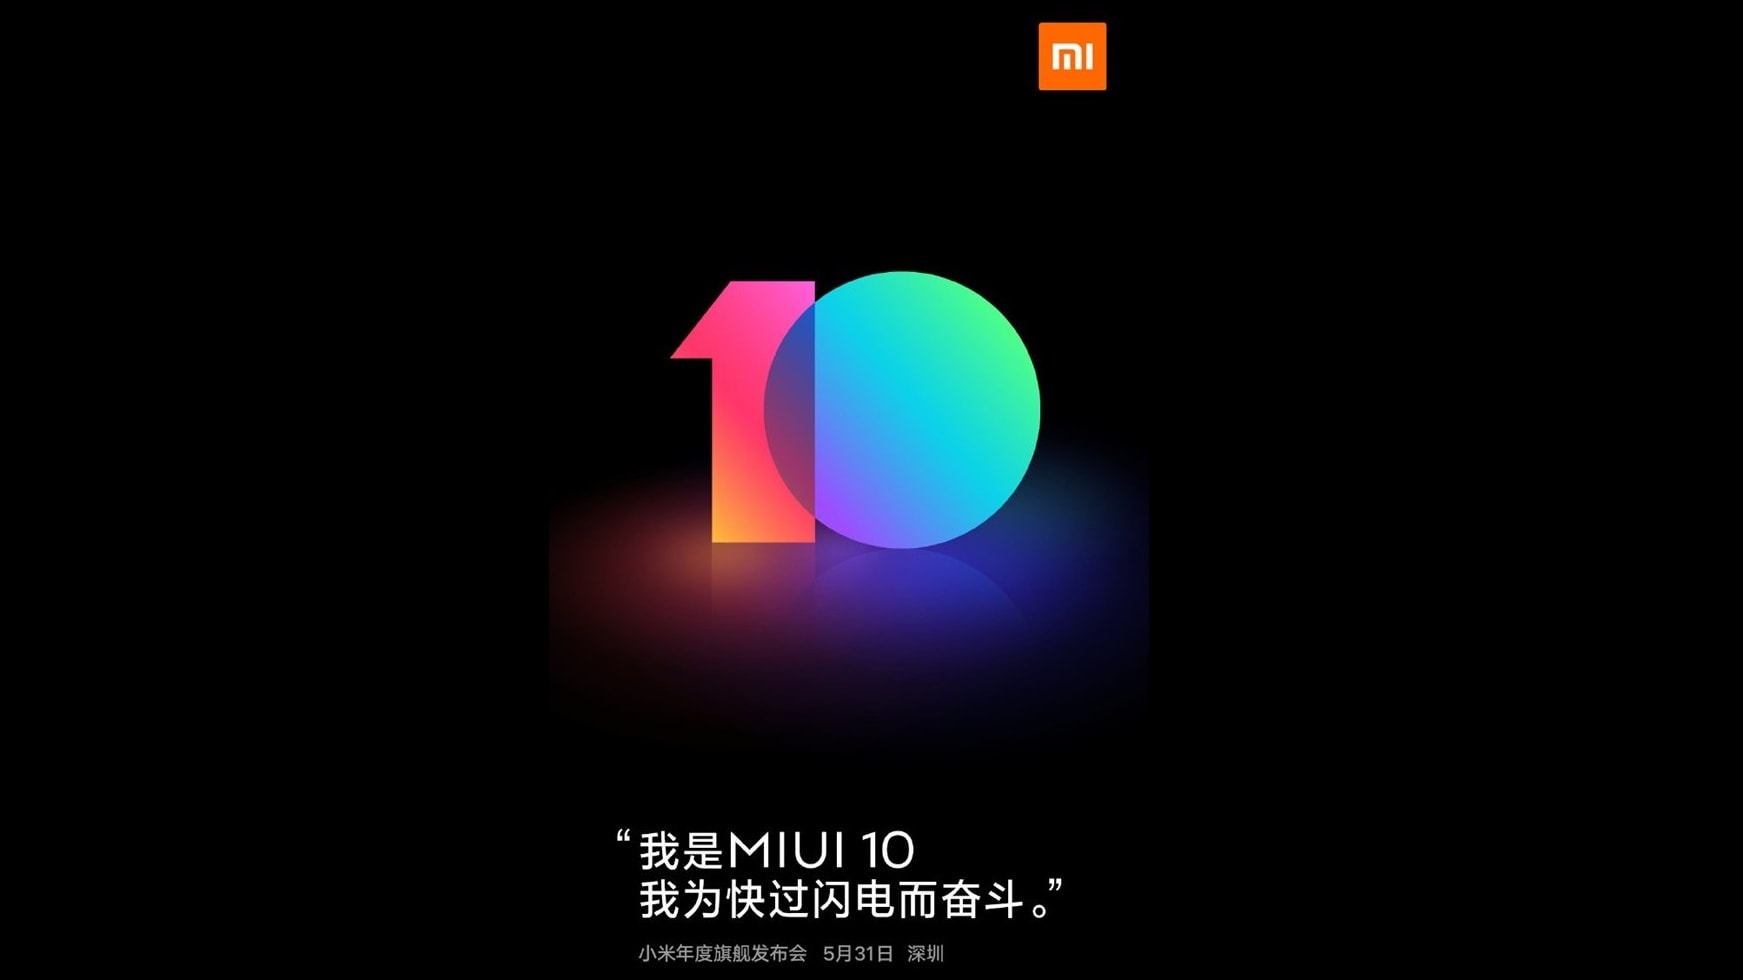 MIUI 10 teaser spotted on Weibo. Image: MIUI/ Weibo